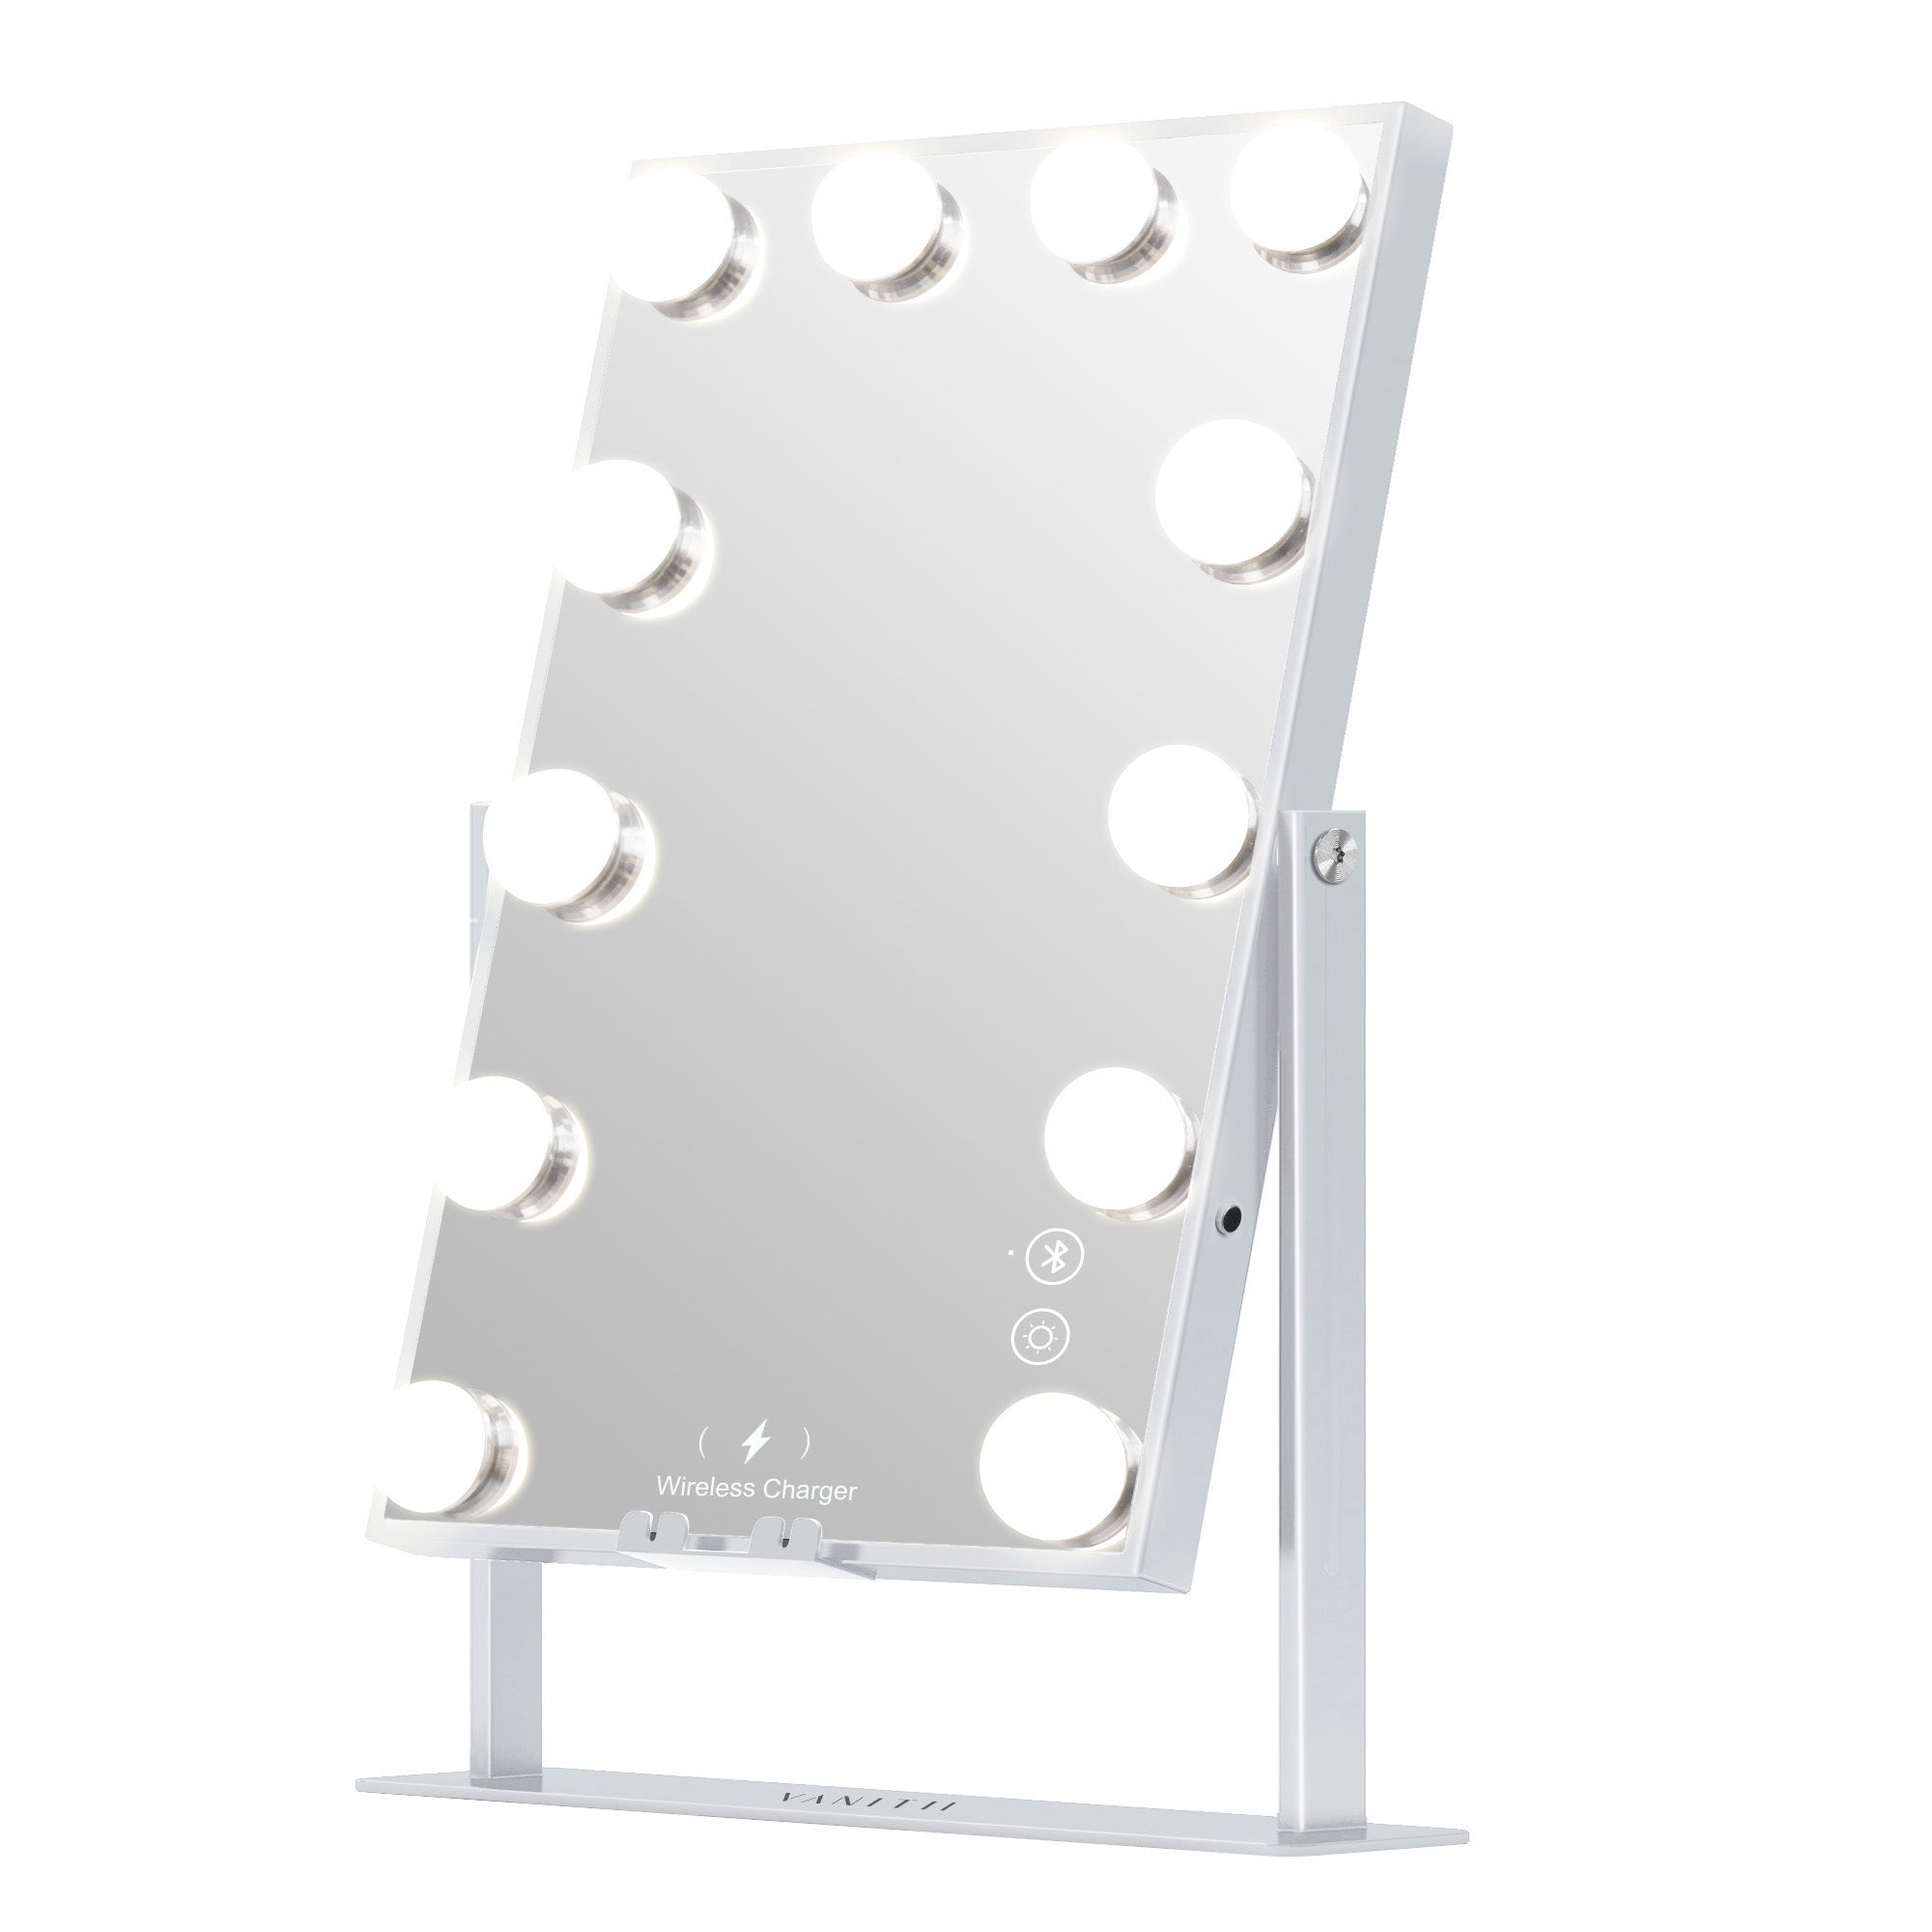 VANITII Hathaway Hollywood Slim Vanity Mirror with Wireless Charging L - 12 Dimmable LED Bulbs